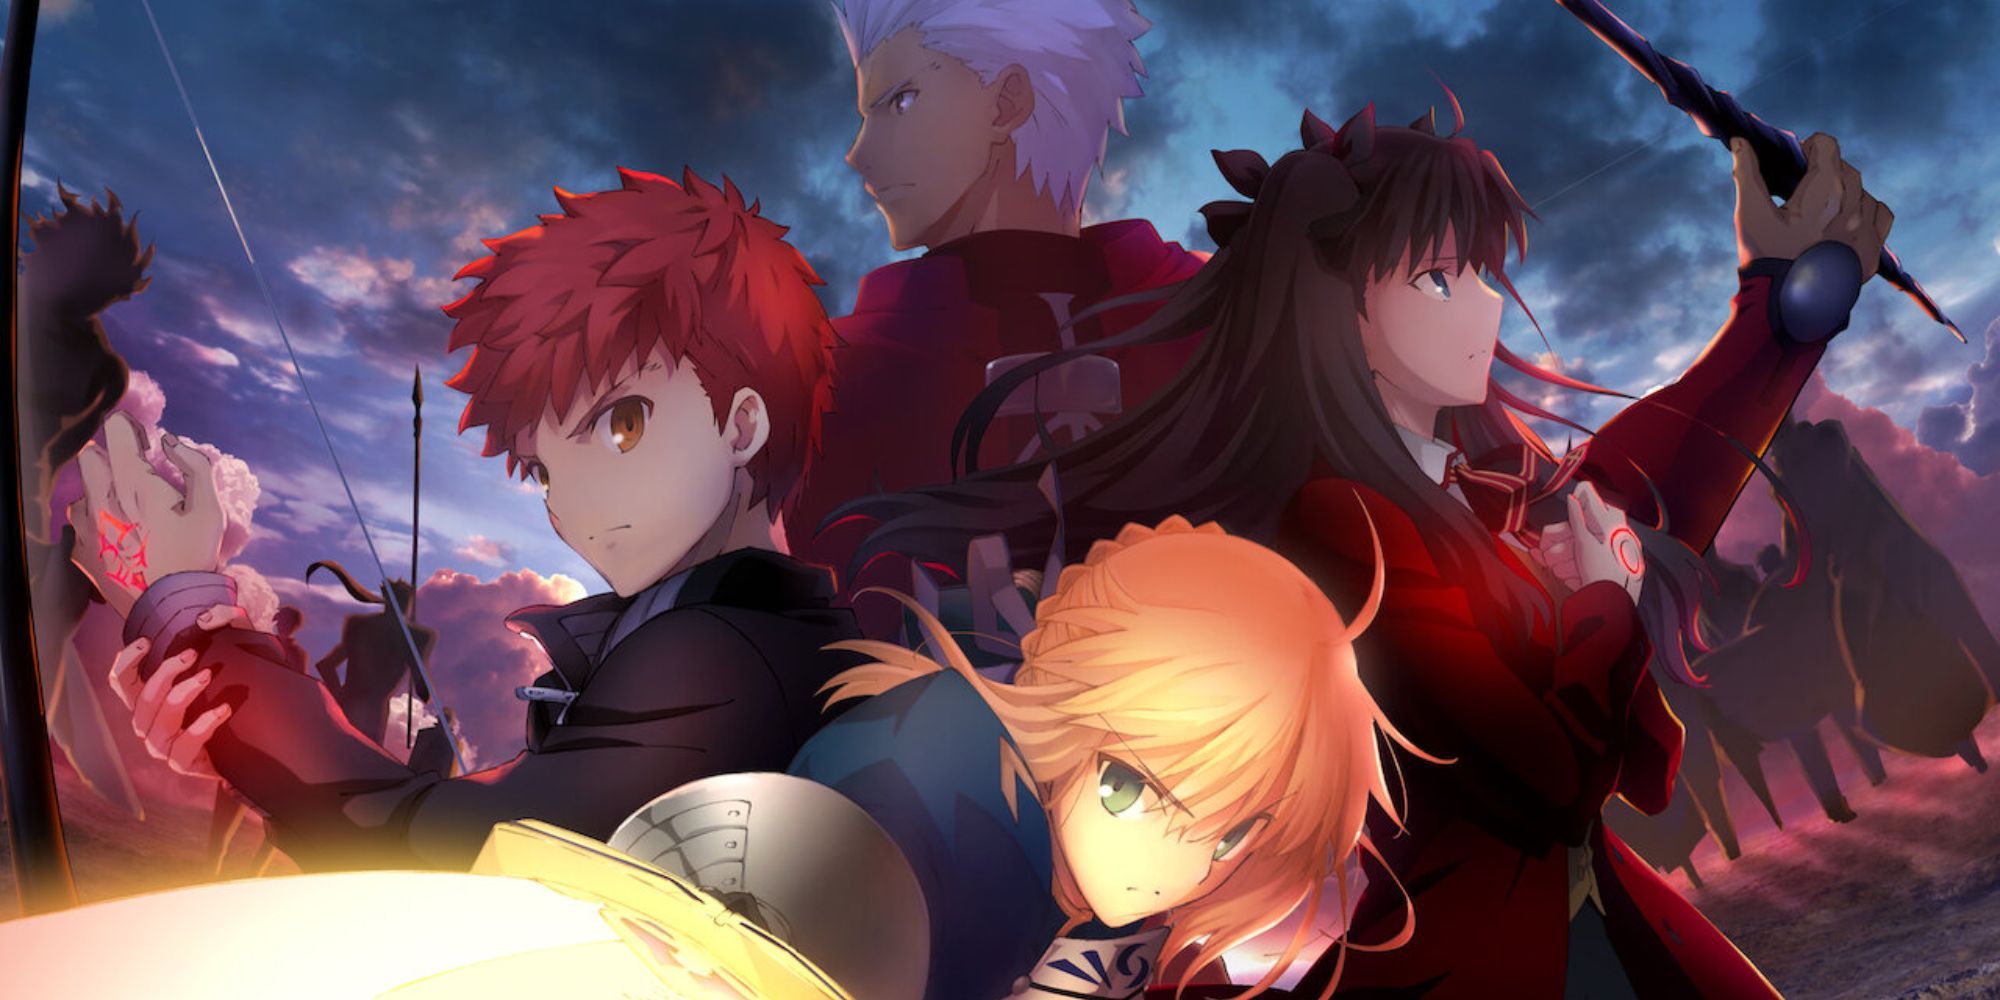 Does Fate/Stay Night: Unlimited Blade Works Still Hit As Hard?